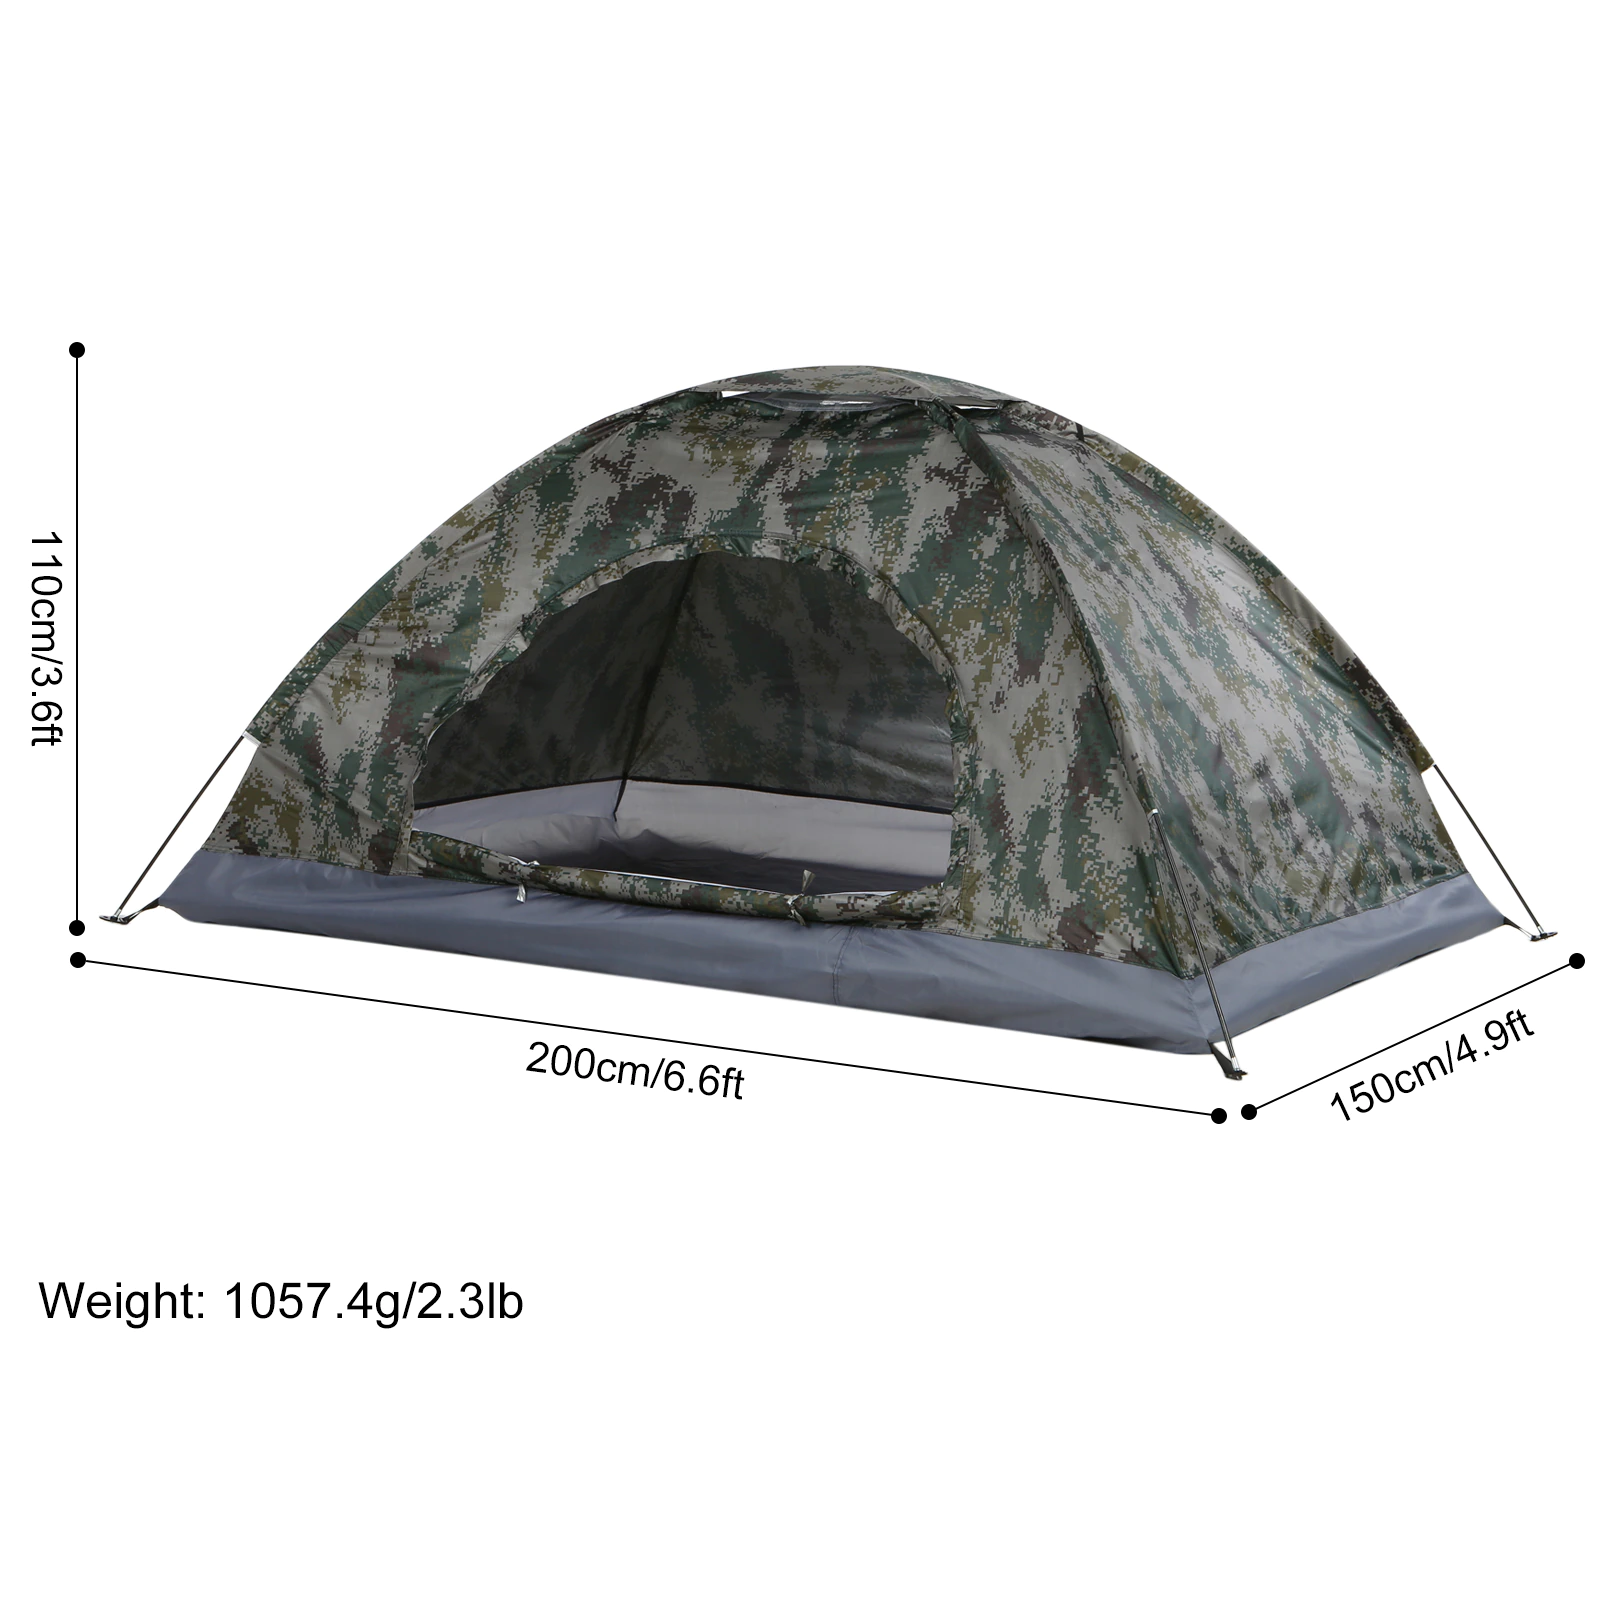 Cheap Goat Tents Summer Portable 2 People Tent Outdoor Travel Camping Tent For Outdoor Camping Hiking Fishing Easy Install Tent With Carry Bag